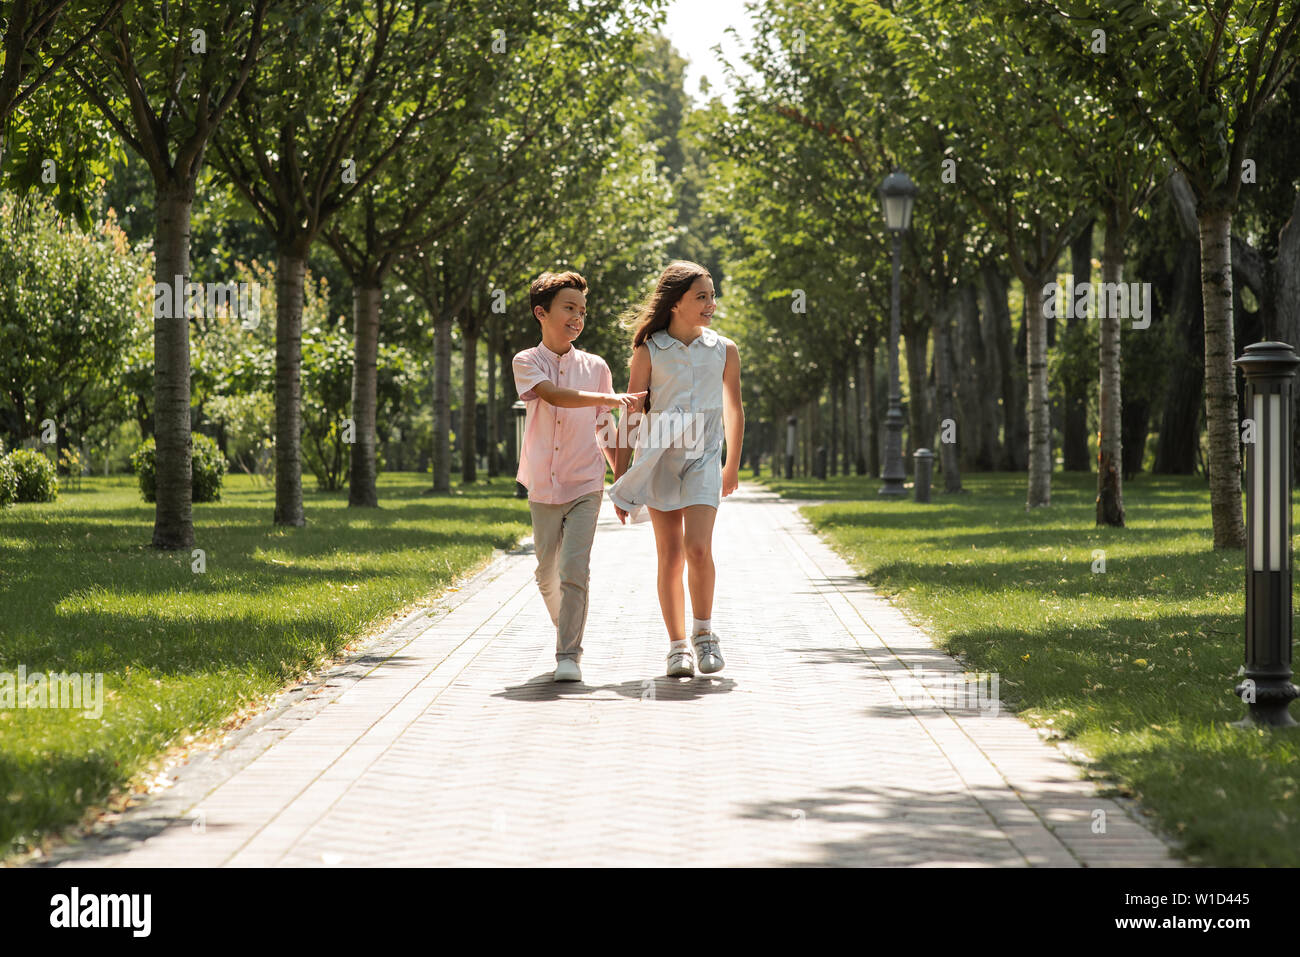 You are my best frind. Little boy and girl holding hands and smiling while walking together in park. Summertime. Friendship Stock Photo